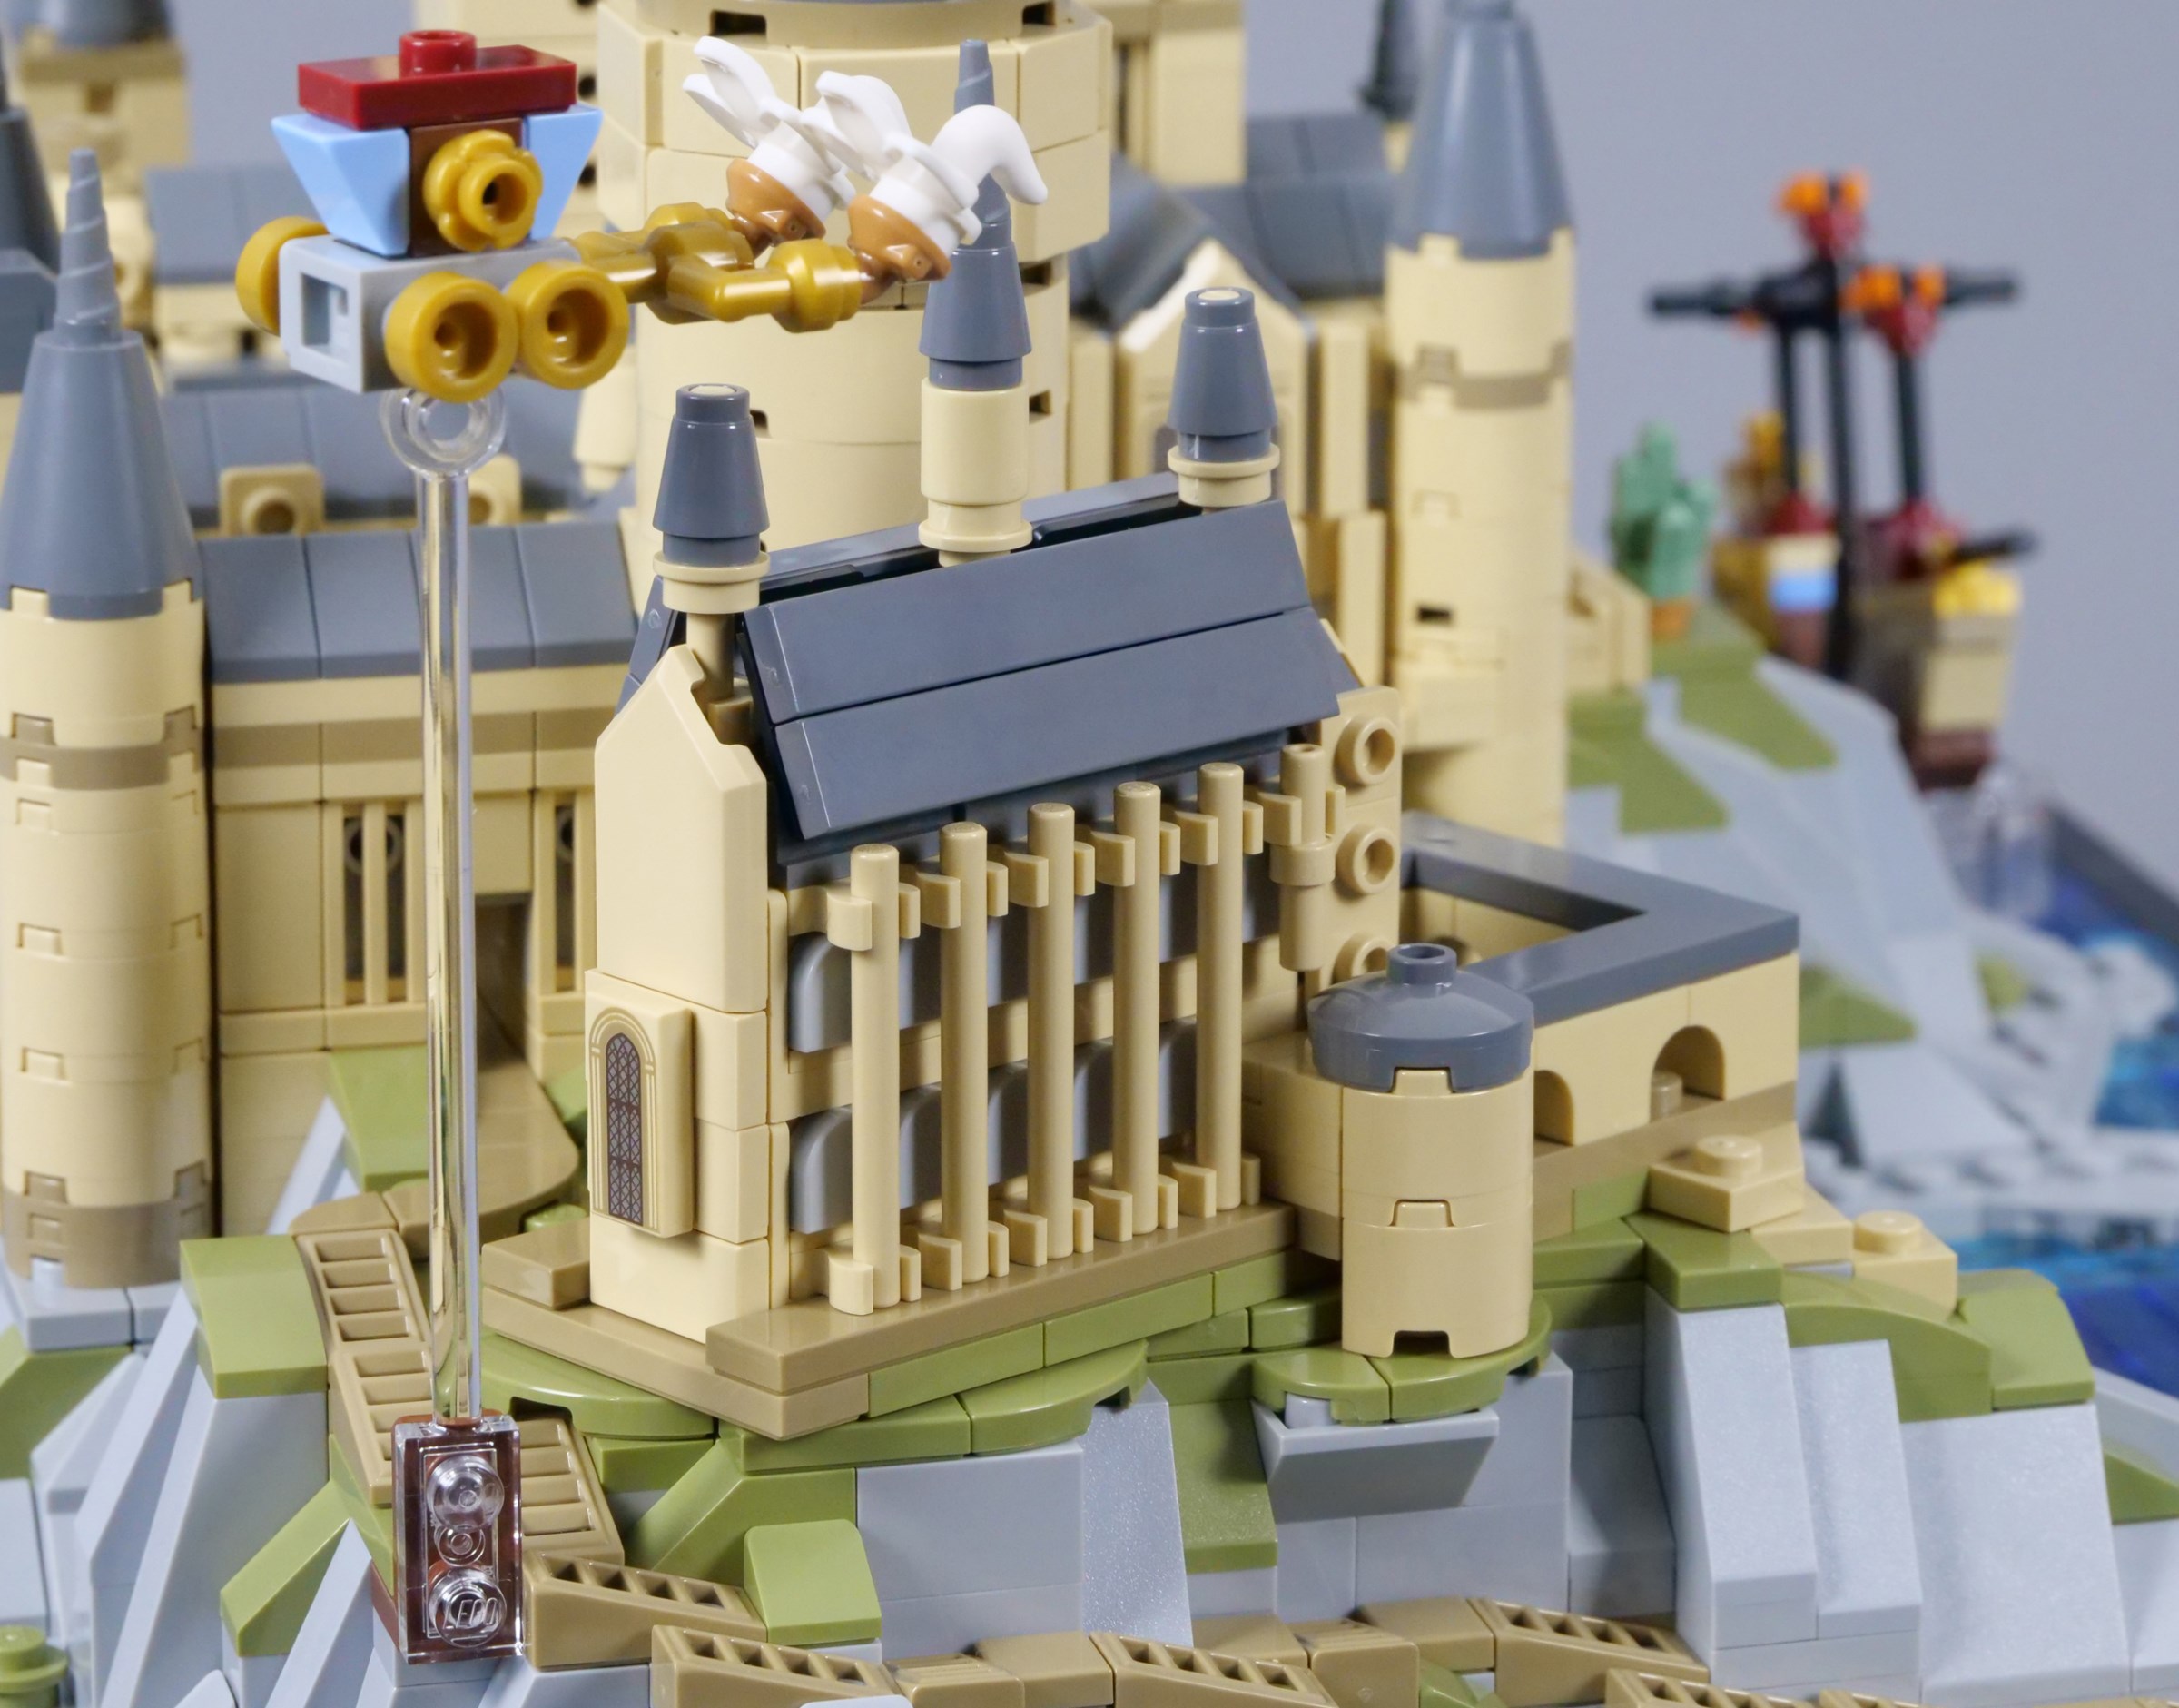  LEGO Harry Potter Hogwarts Castle and Grounds 76419 Building  Set, Gift Idea for Adults, Buildable Display Model, Collectible Harry Potter  Playset, Recreate Iconic Scenes from The Wizarding World : Home 